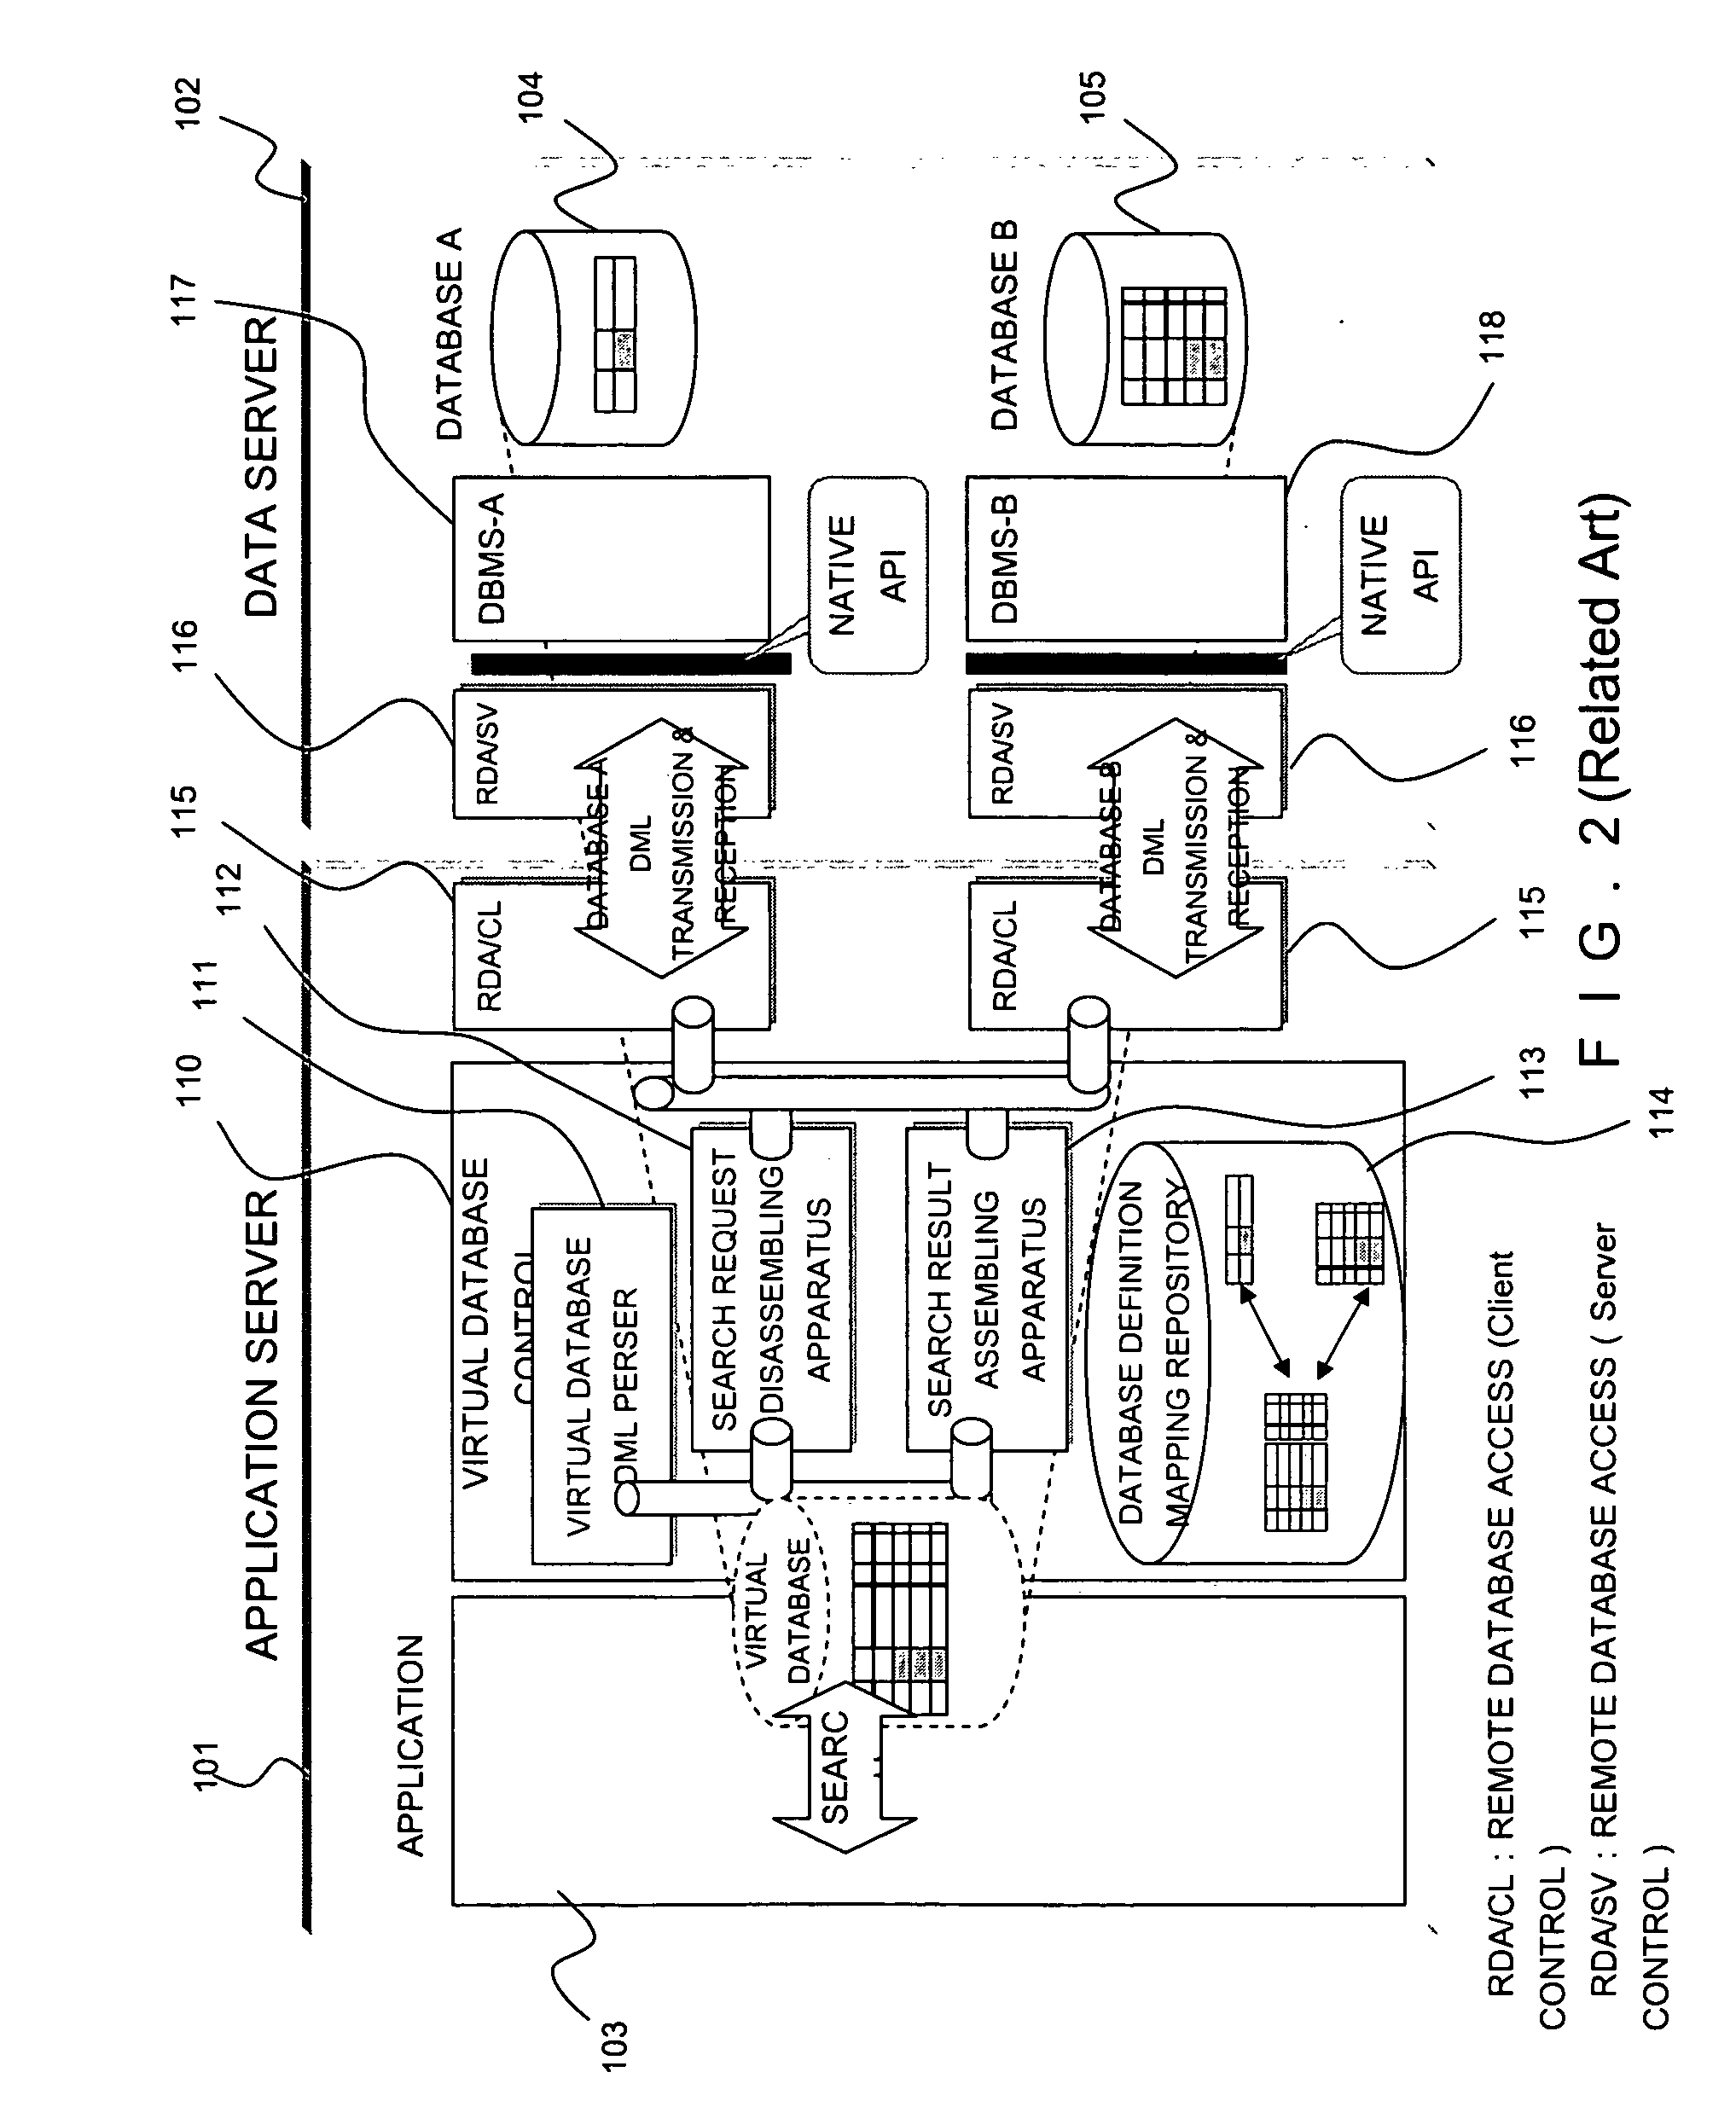 Method and system for remote accessing a virtual database system